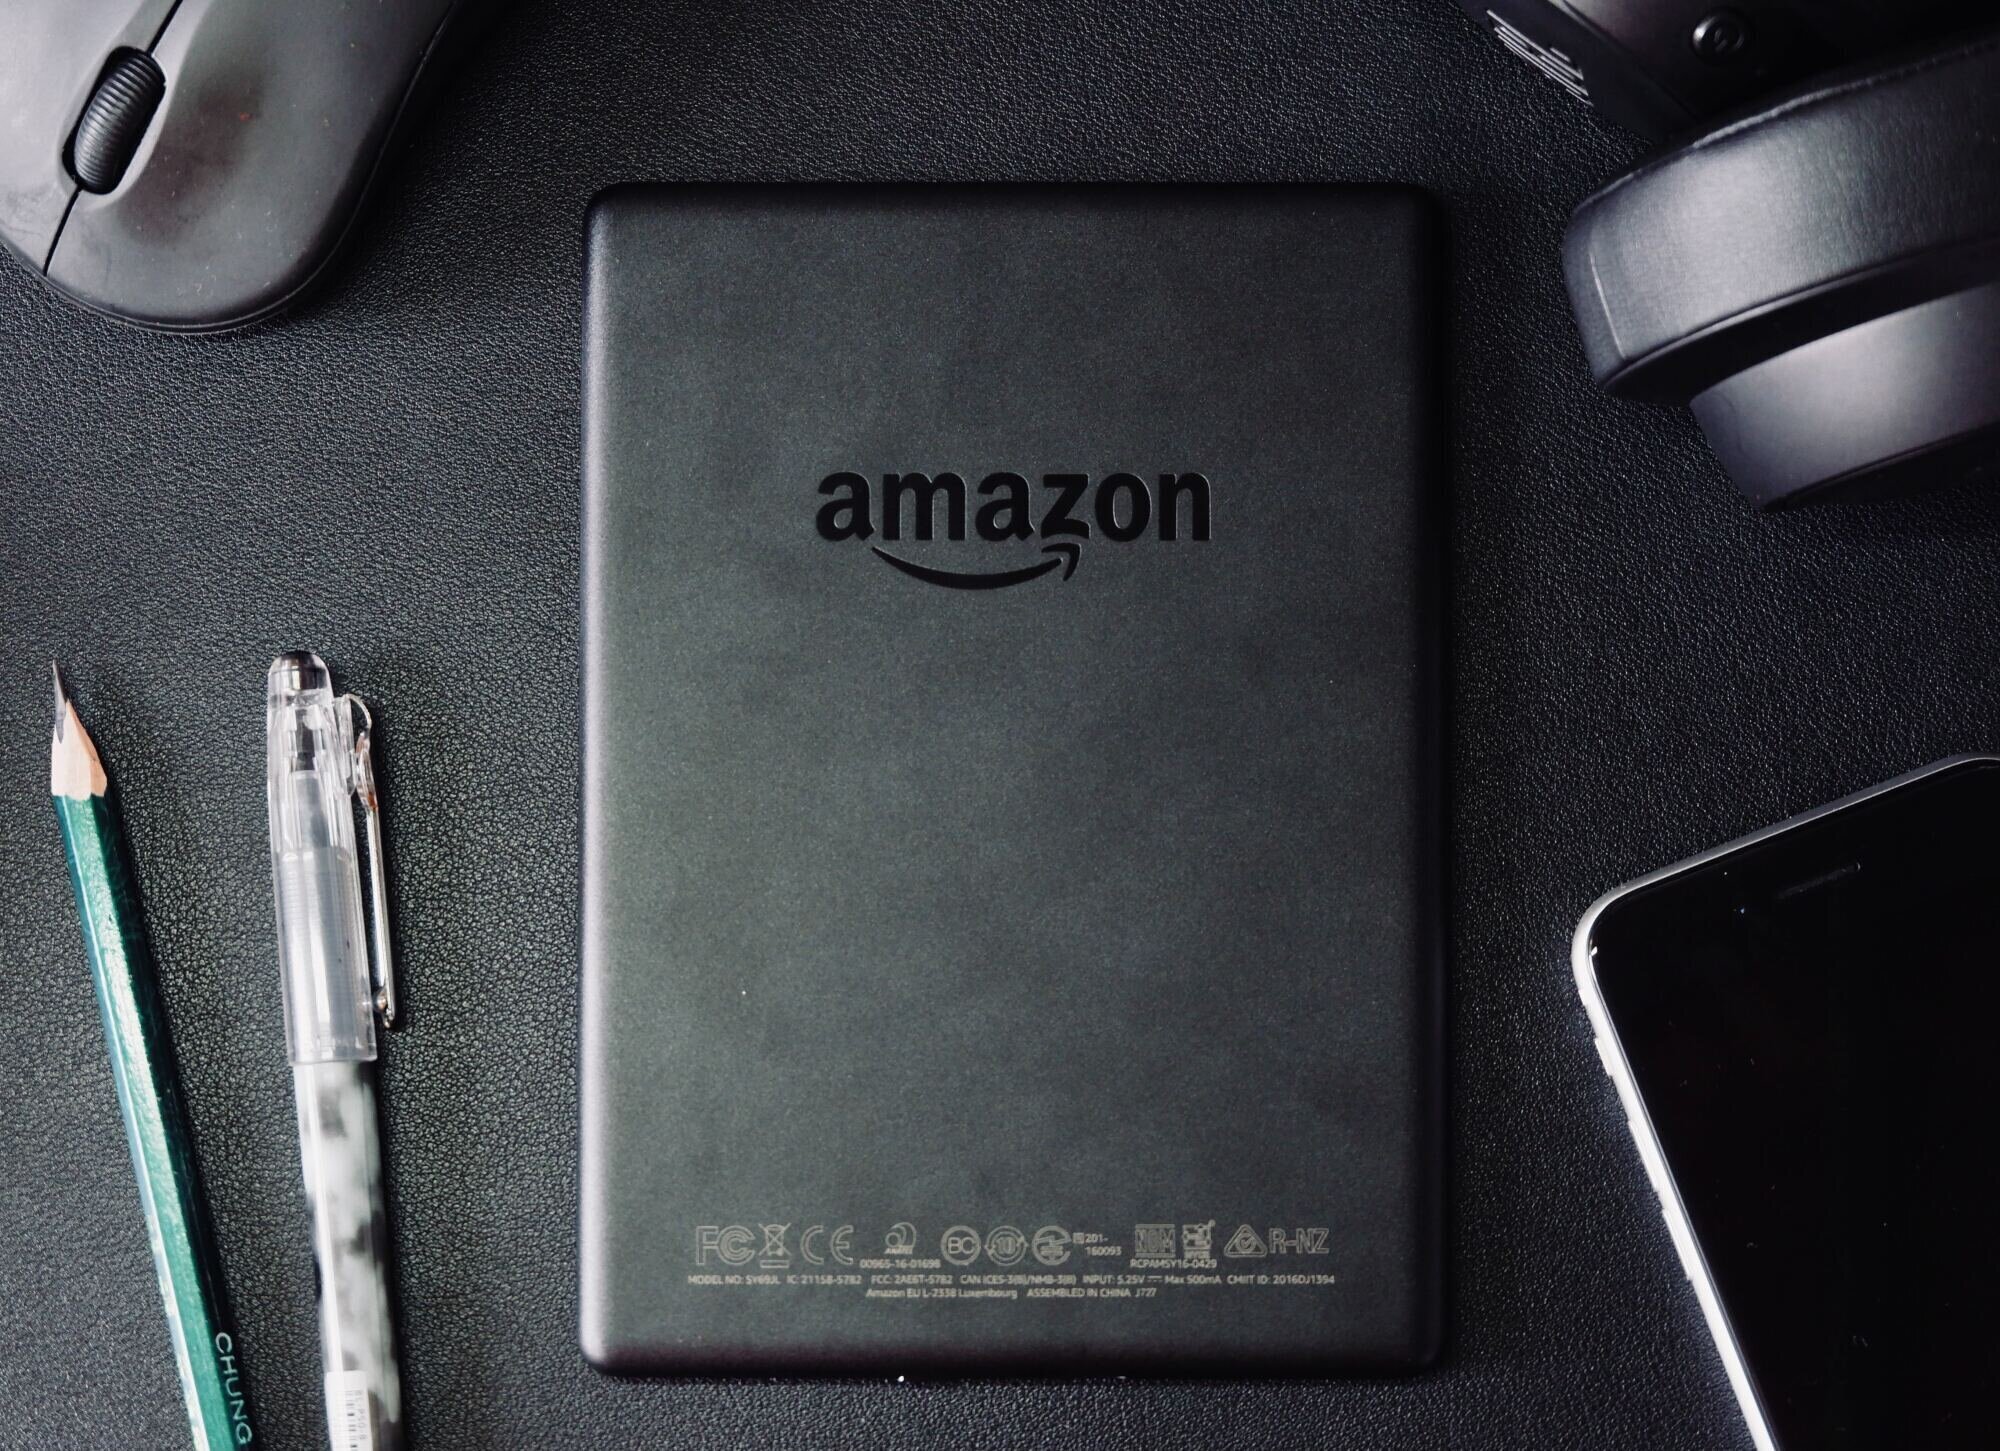 Amazon tablet back with the amazon logo, in the center of a desk mat. A mouse, headphones, pen and smartphone partially visible. All black.